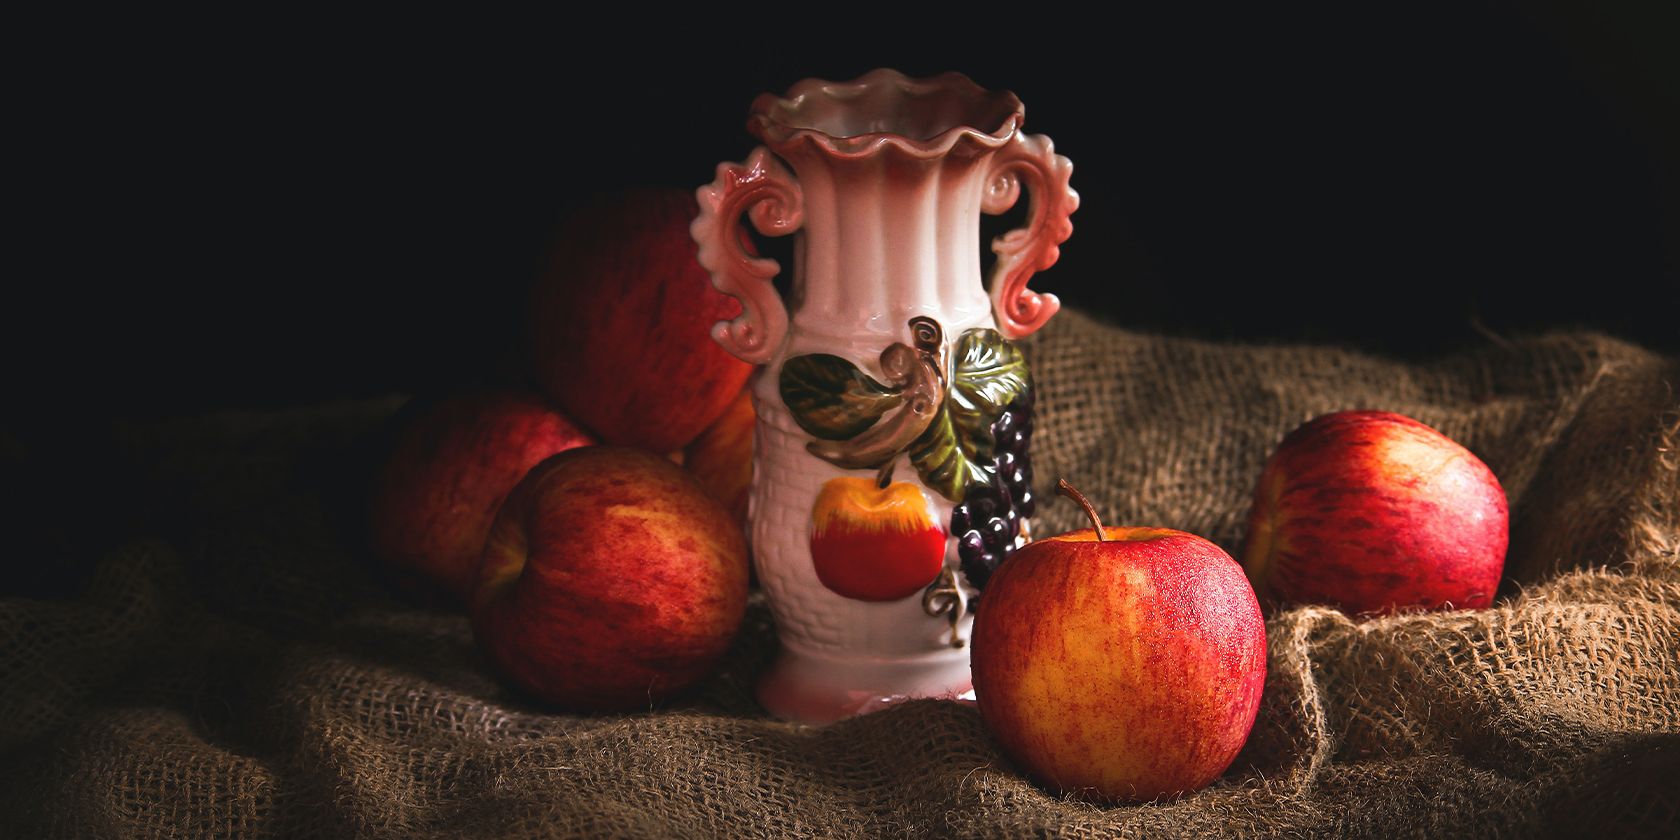 Fruits and a vase